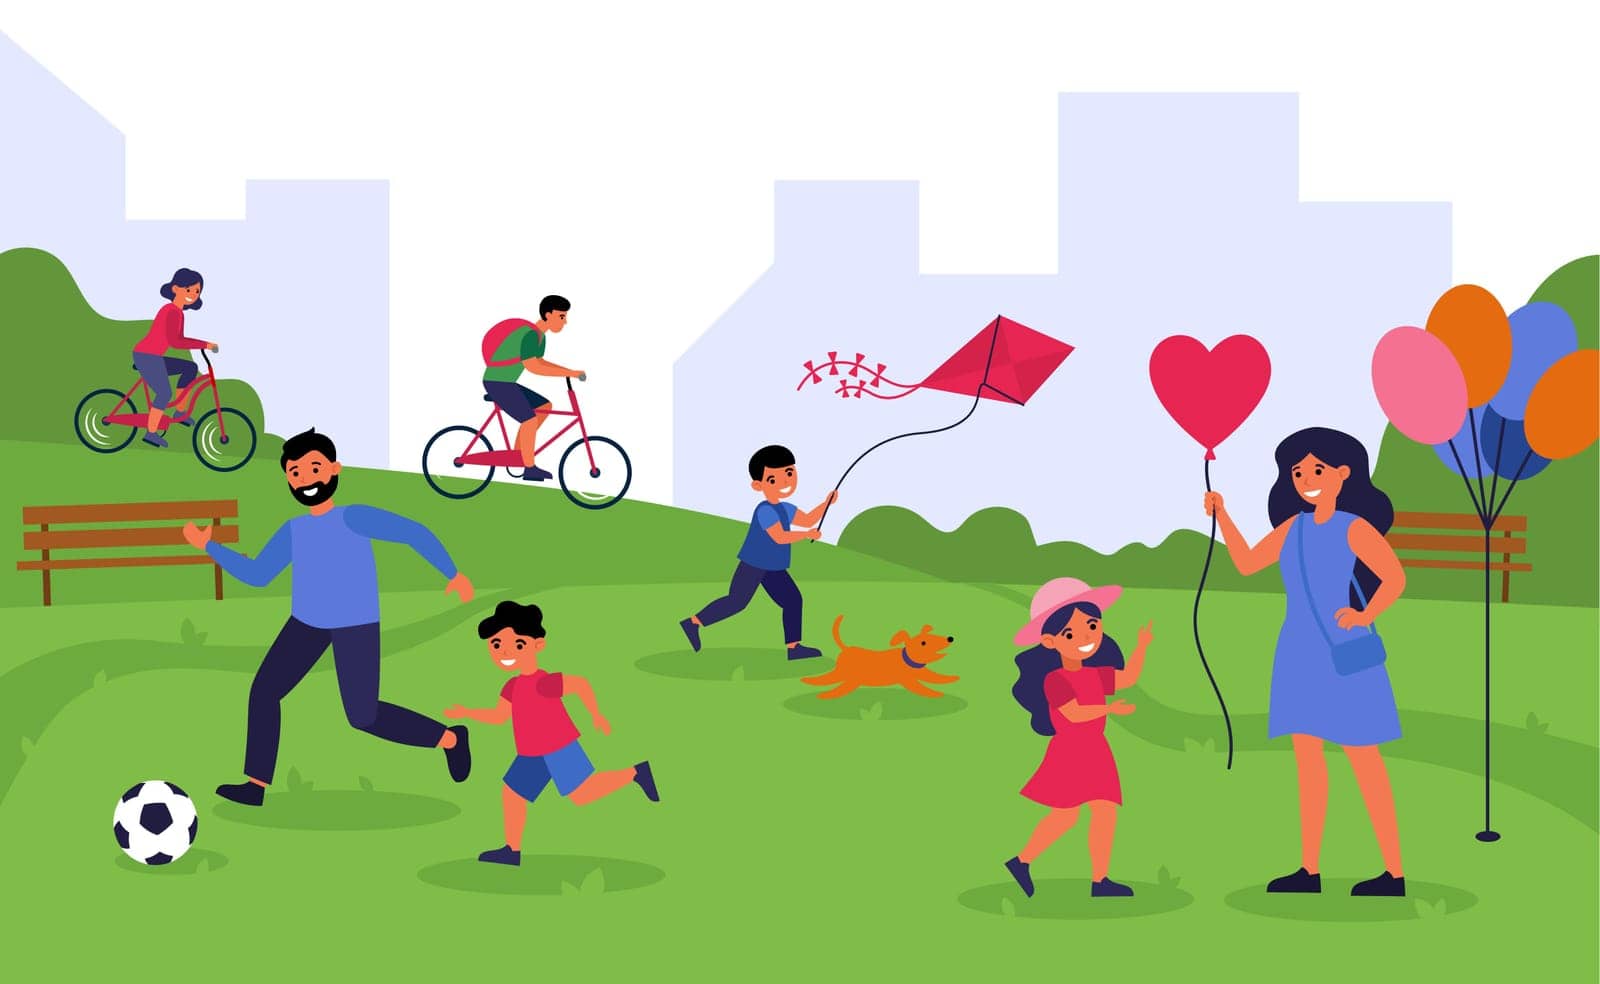 Leisure time outdoors and togetherness concept. Mothers, fathers and kids enjoying outdoor activities. Happy active families spending weekend together in city park, playing soccer, flying kite